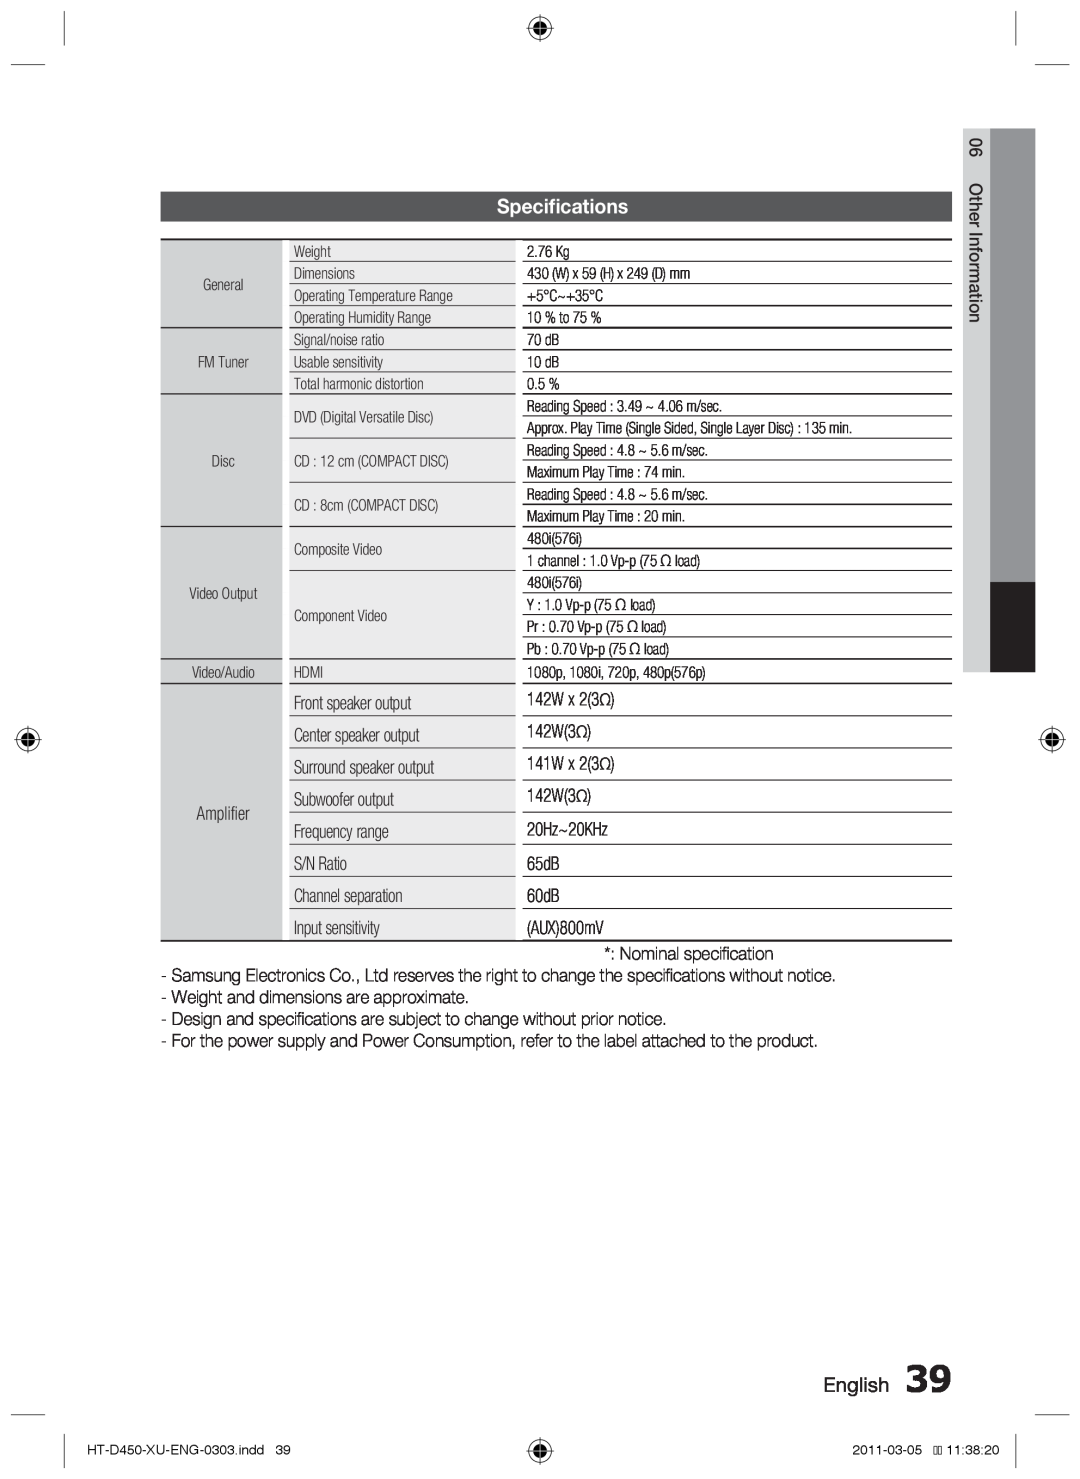 Samsung HT-D450, HT-D455, HT-D453 user manual Specifications, English 